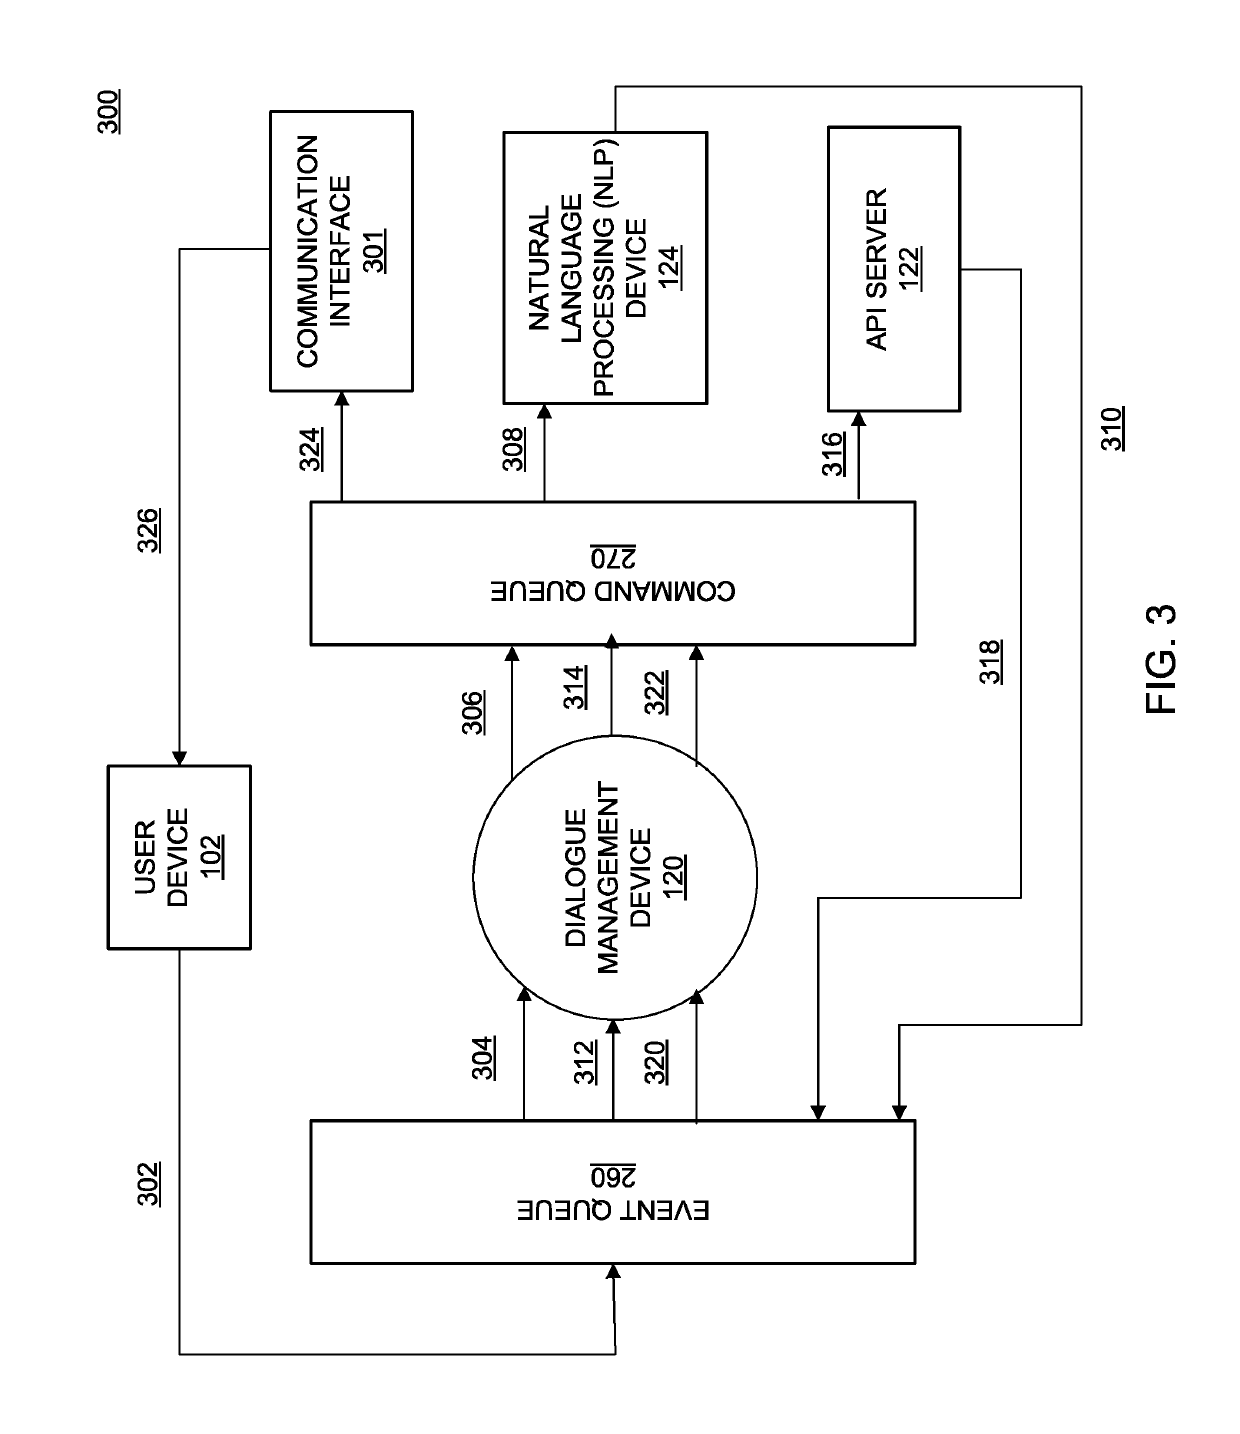 Systems and methods for providing automated natural language dialogue with customers